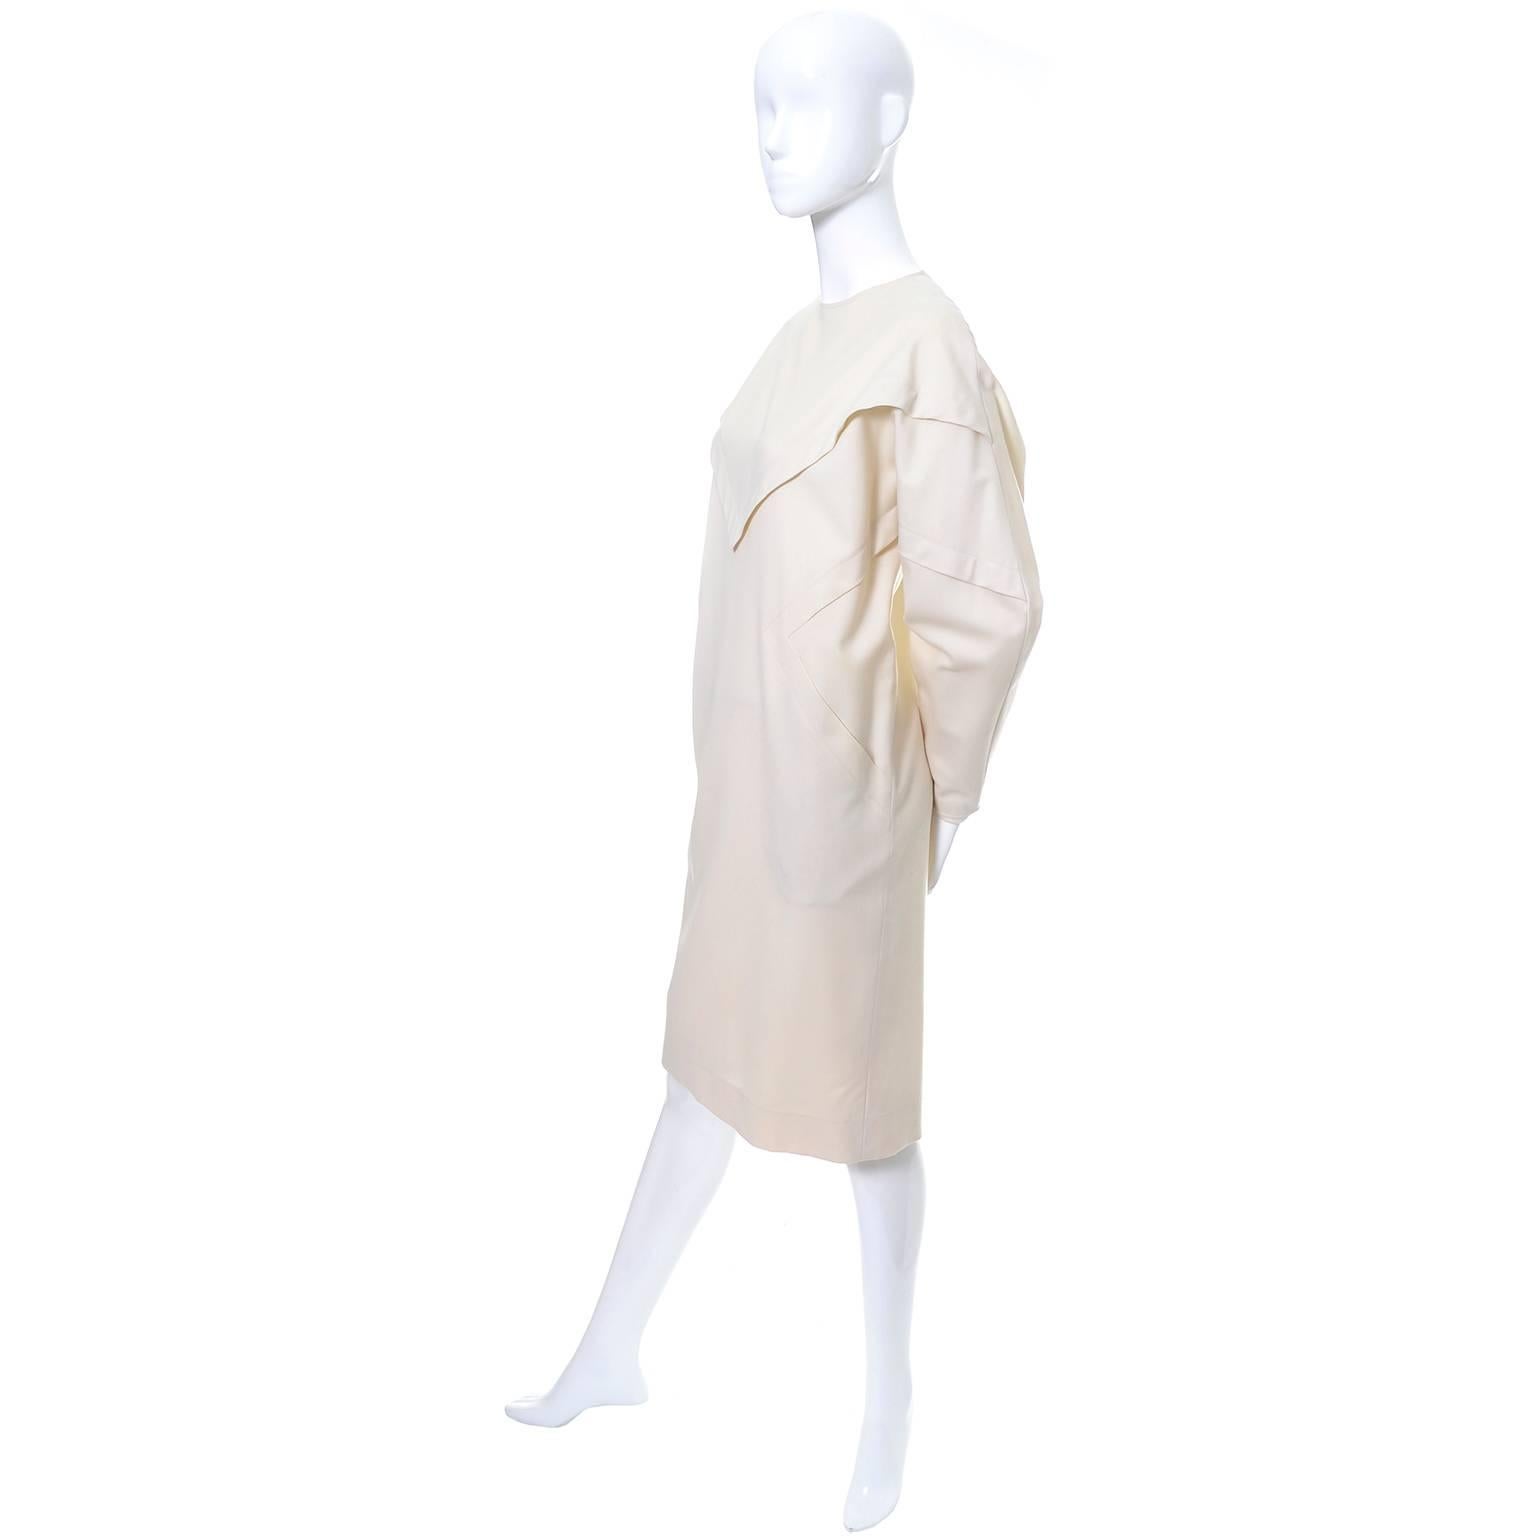 Ronaldus Shamask Avant Garde 1980's Vintage Cream Wool Dress Size 6/8 In Excellent Condition For Sale In Portland, OR